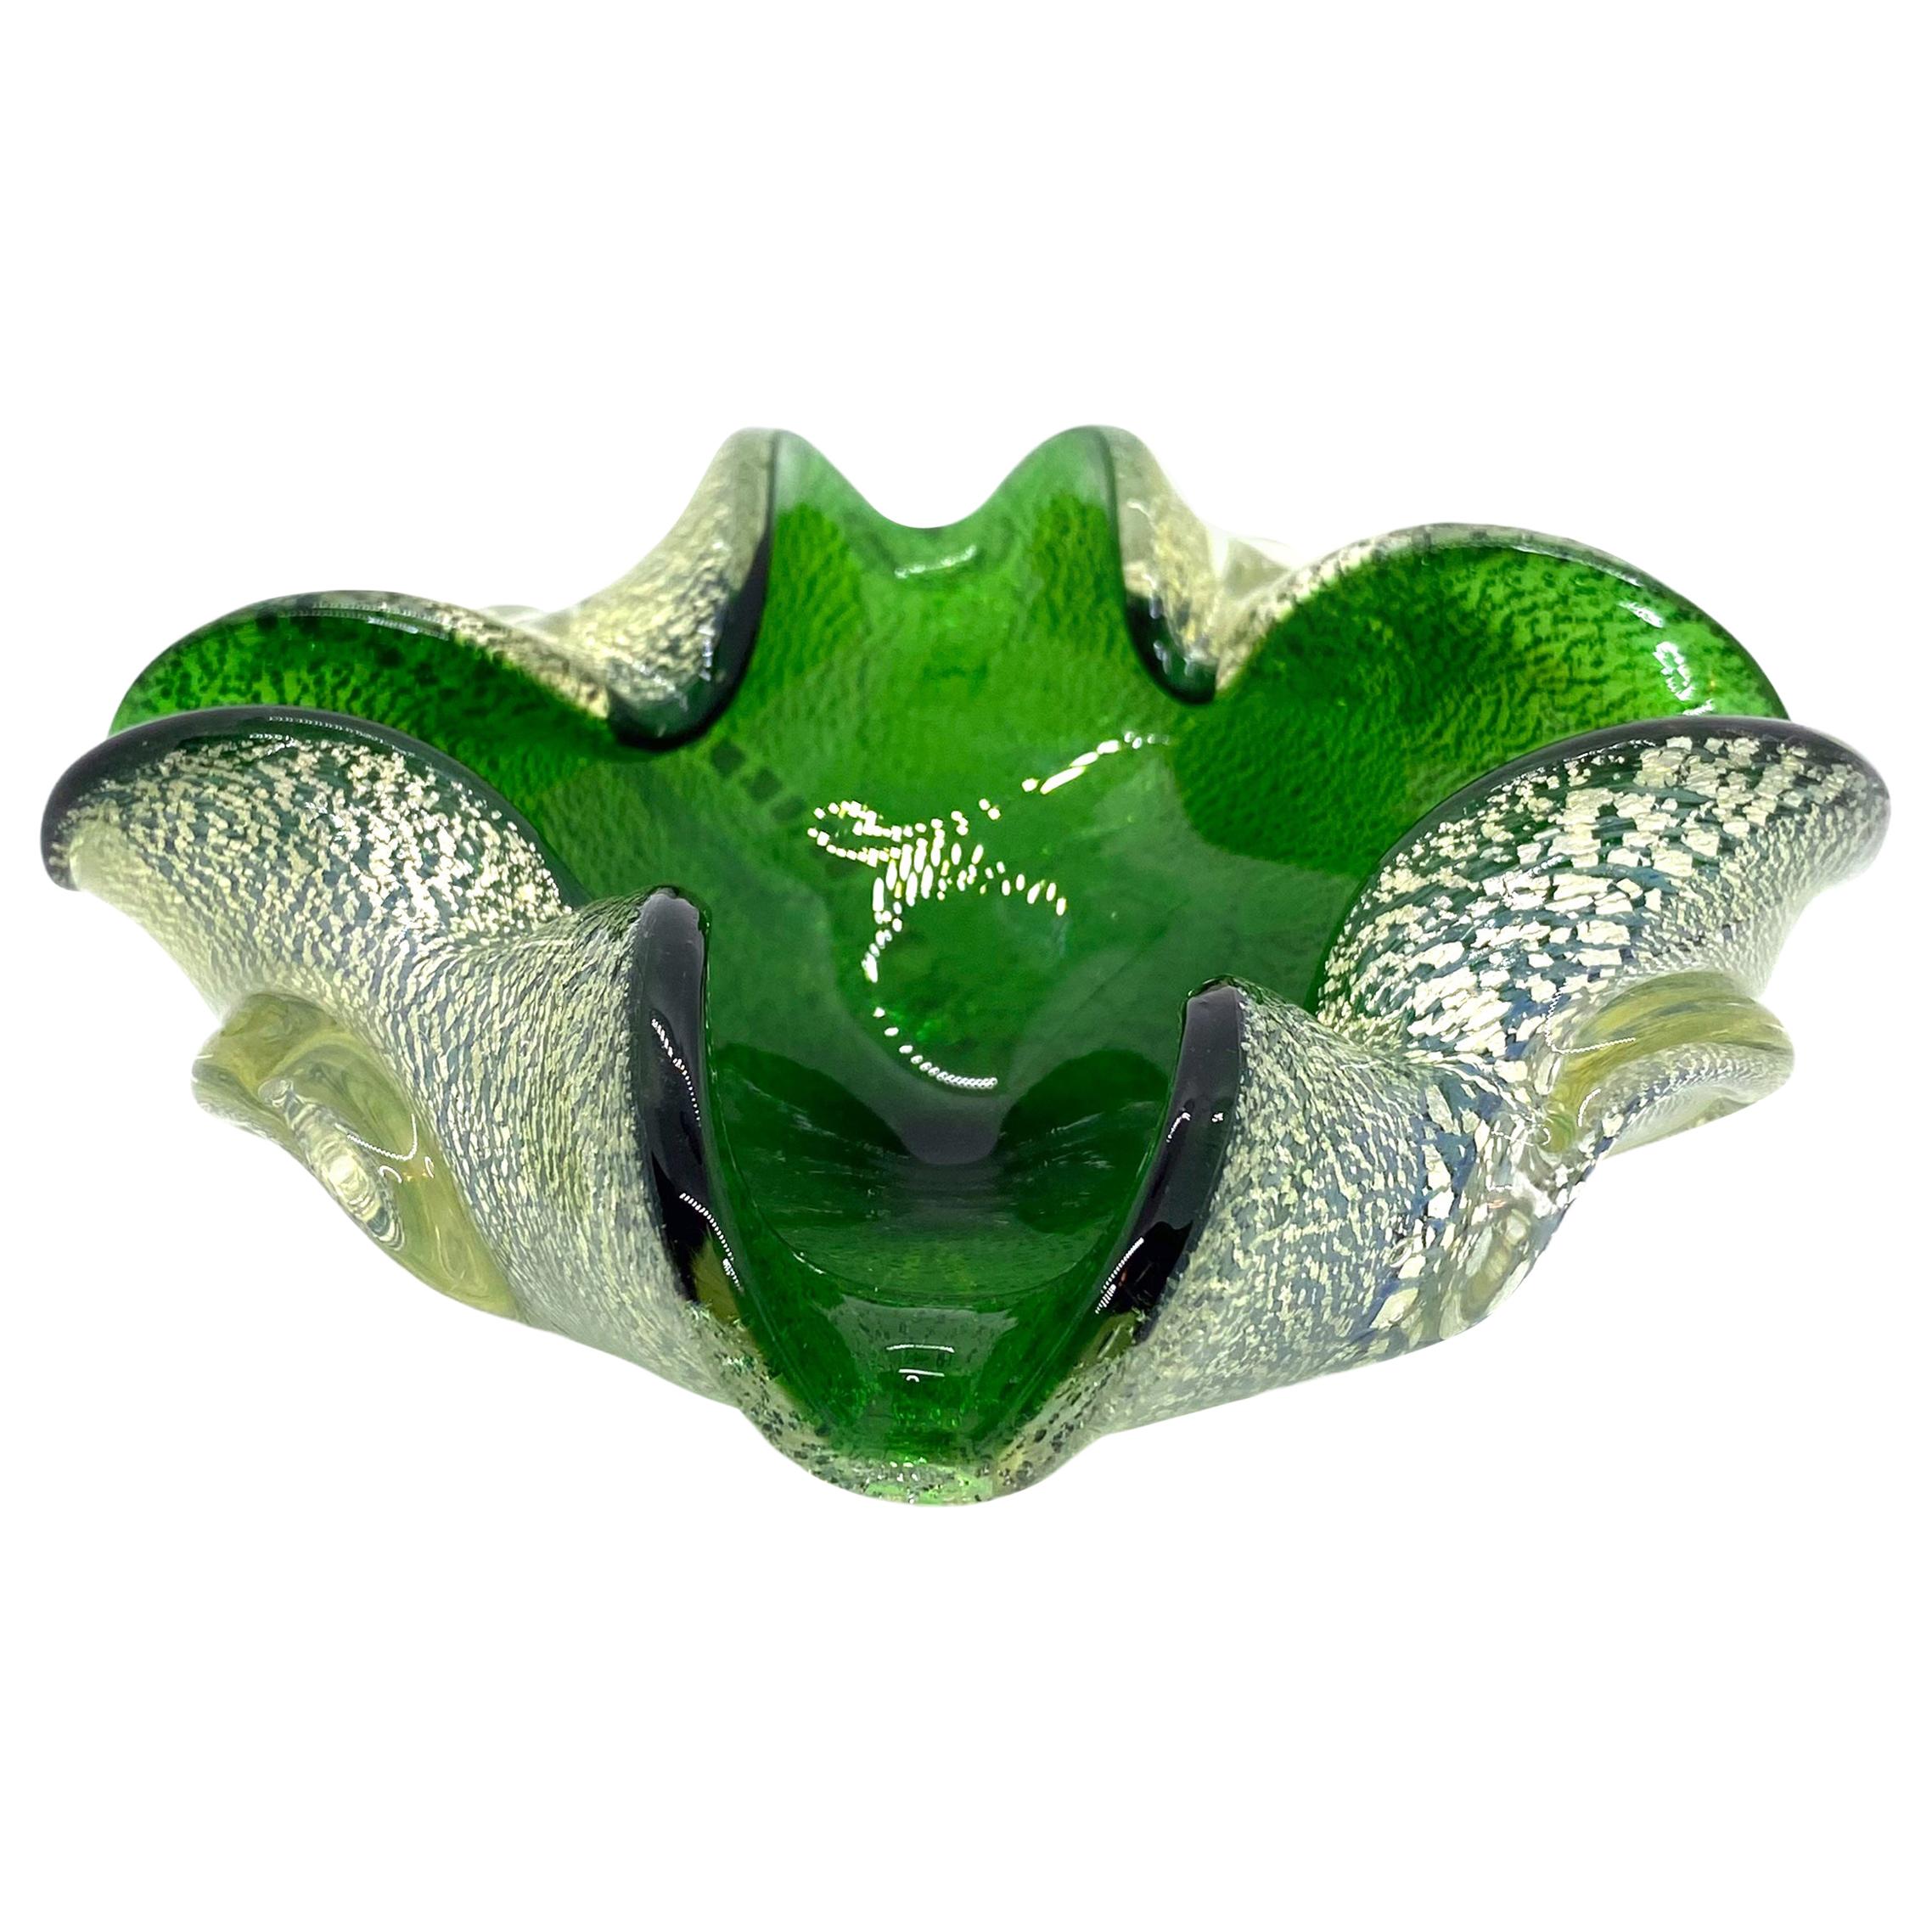 Petite Murano Art Glass Bowl or Catchall by Barovier Toso, 1950s, Venice, Italy For Sale